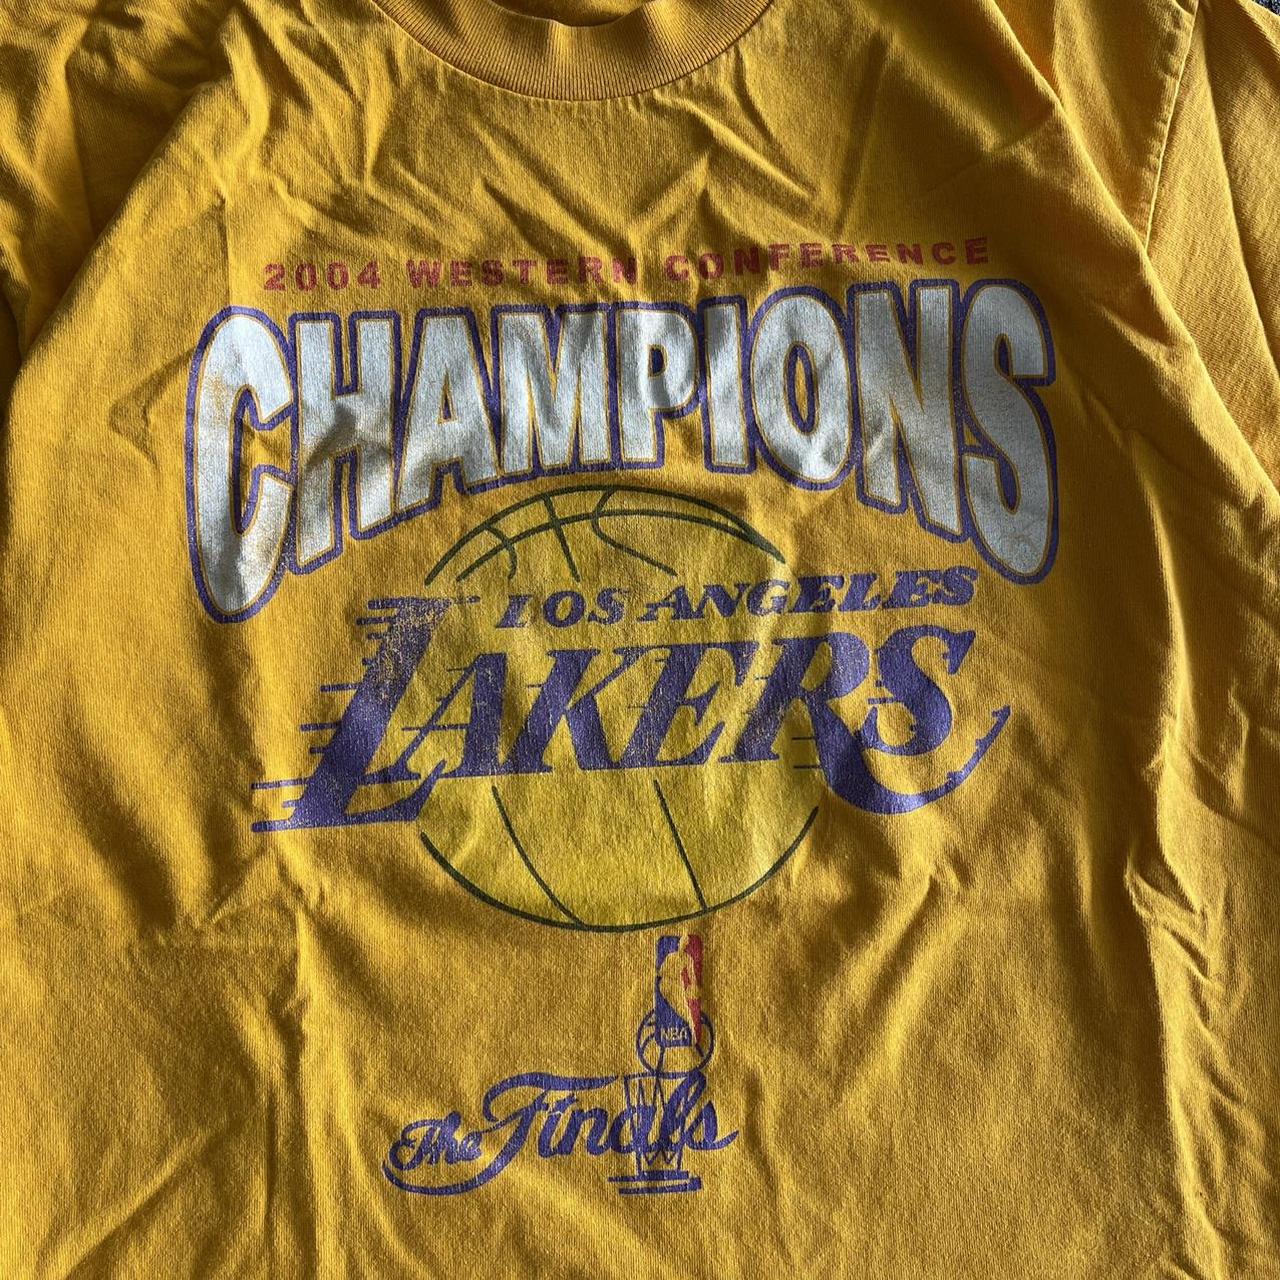 Vintage 2004 Lakers Western Conference Champions - Depop